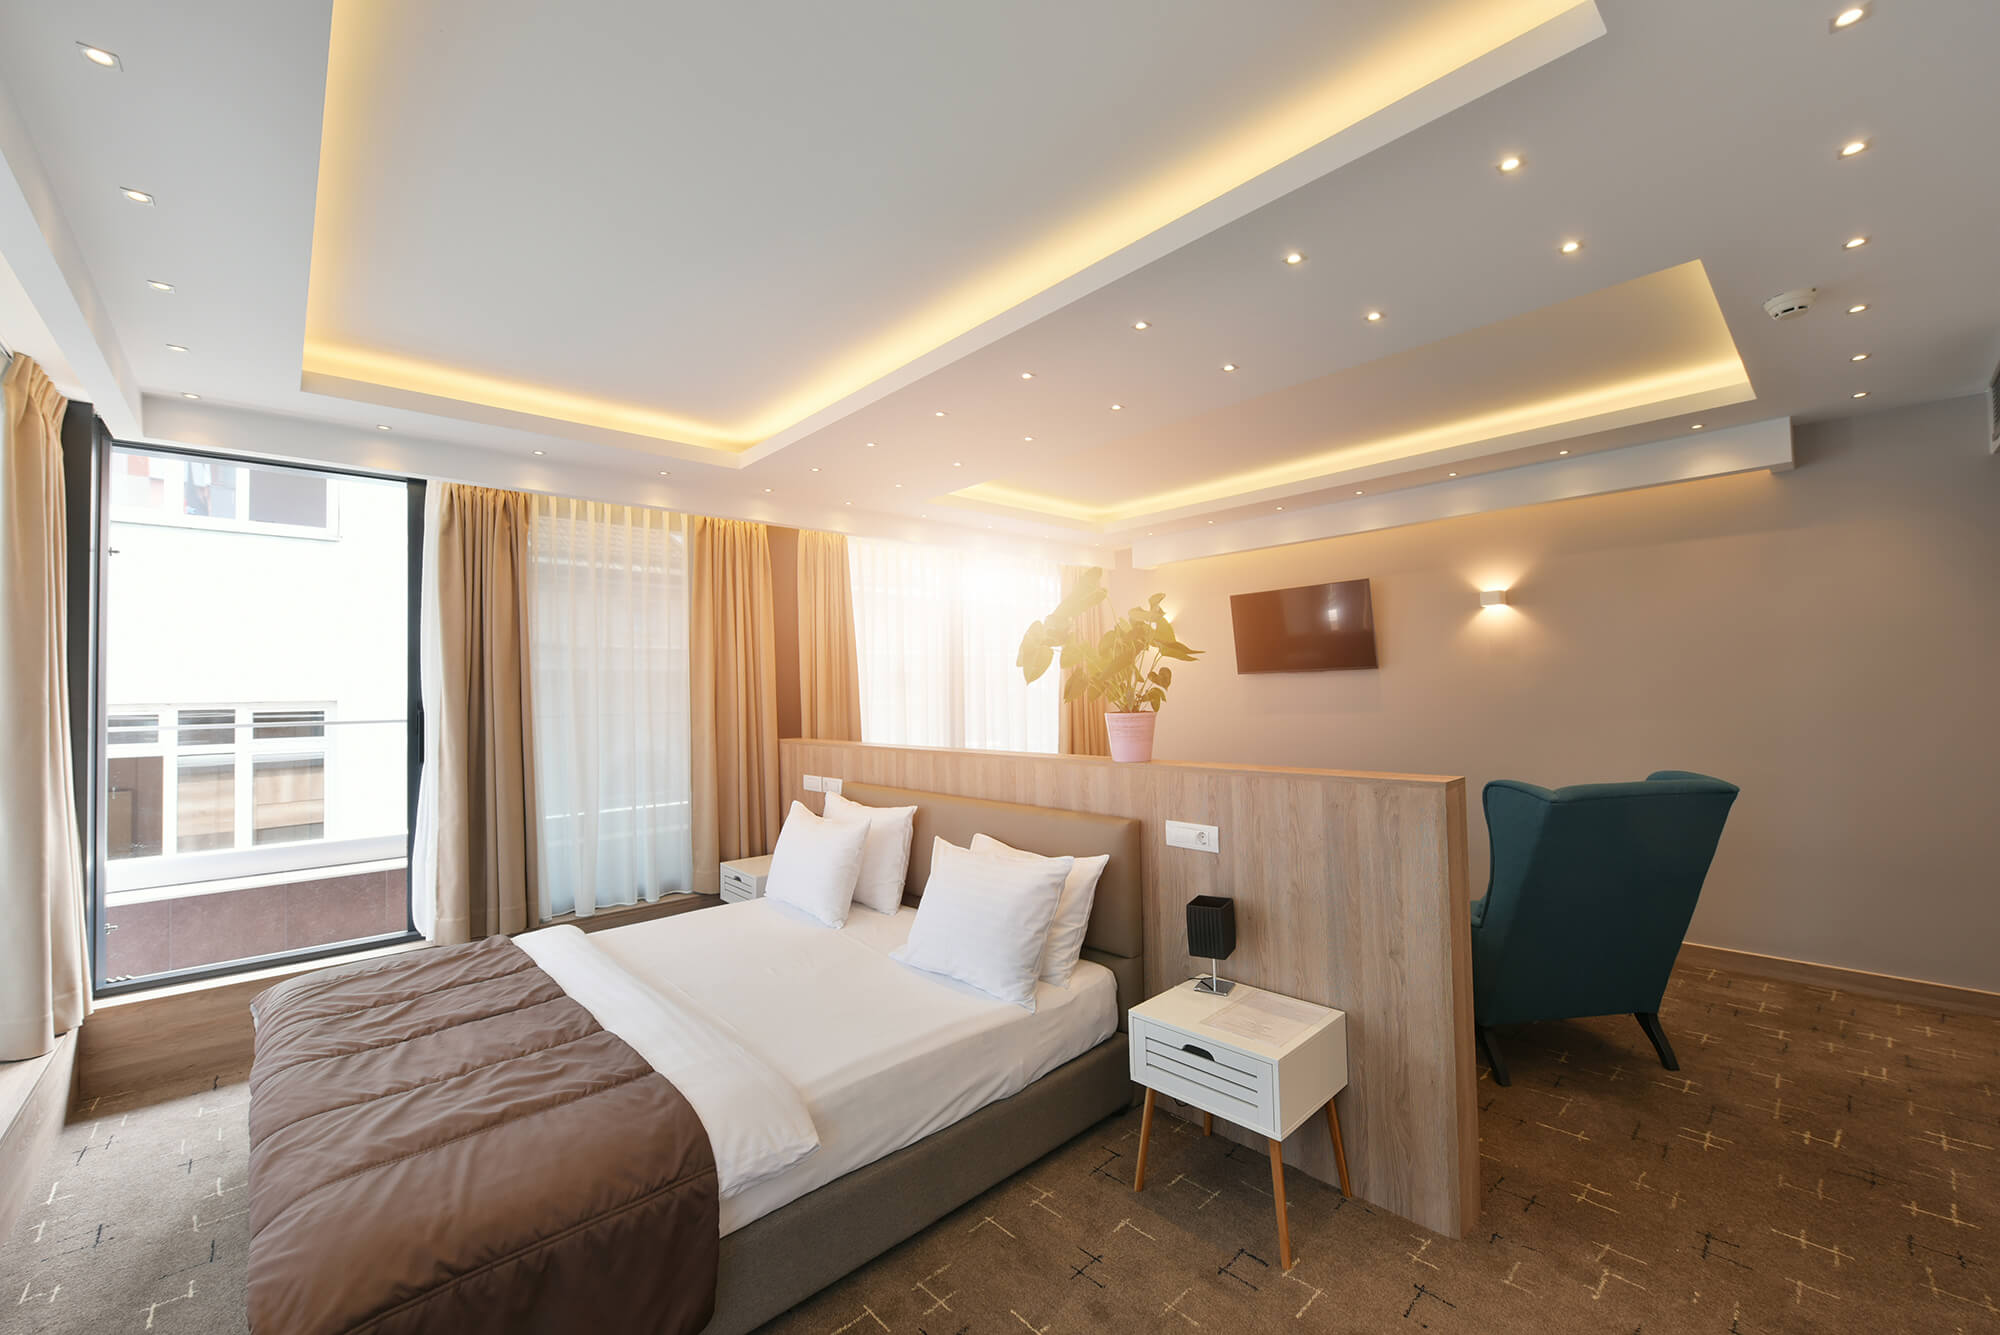 A stylish hotel room with modern furnishings and decor. The room features a comfortable bed with crisp linens, a desk area, and soft lighting. The image conveys the concept of contemporary hotel accommodation and interior design.